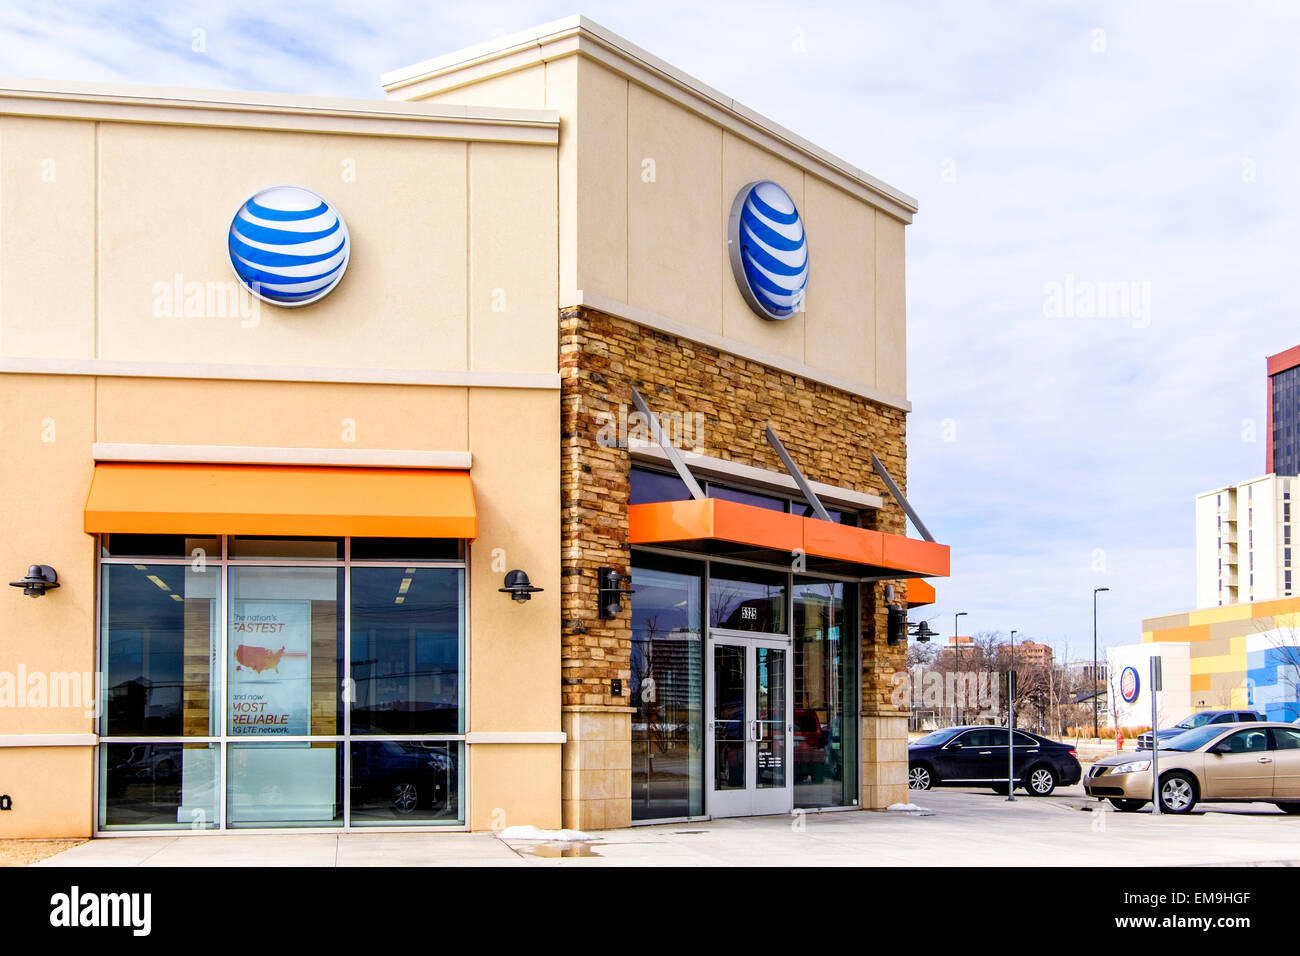 The exterior of an AT&T retail store in Oklahoma City, Oklahoma, USA. Stock Photo